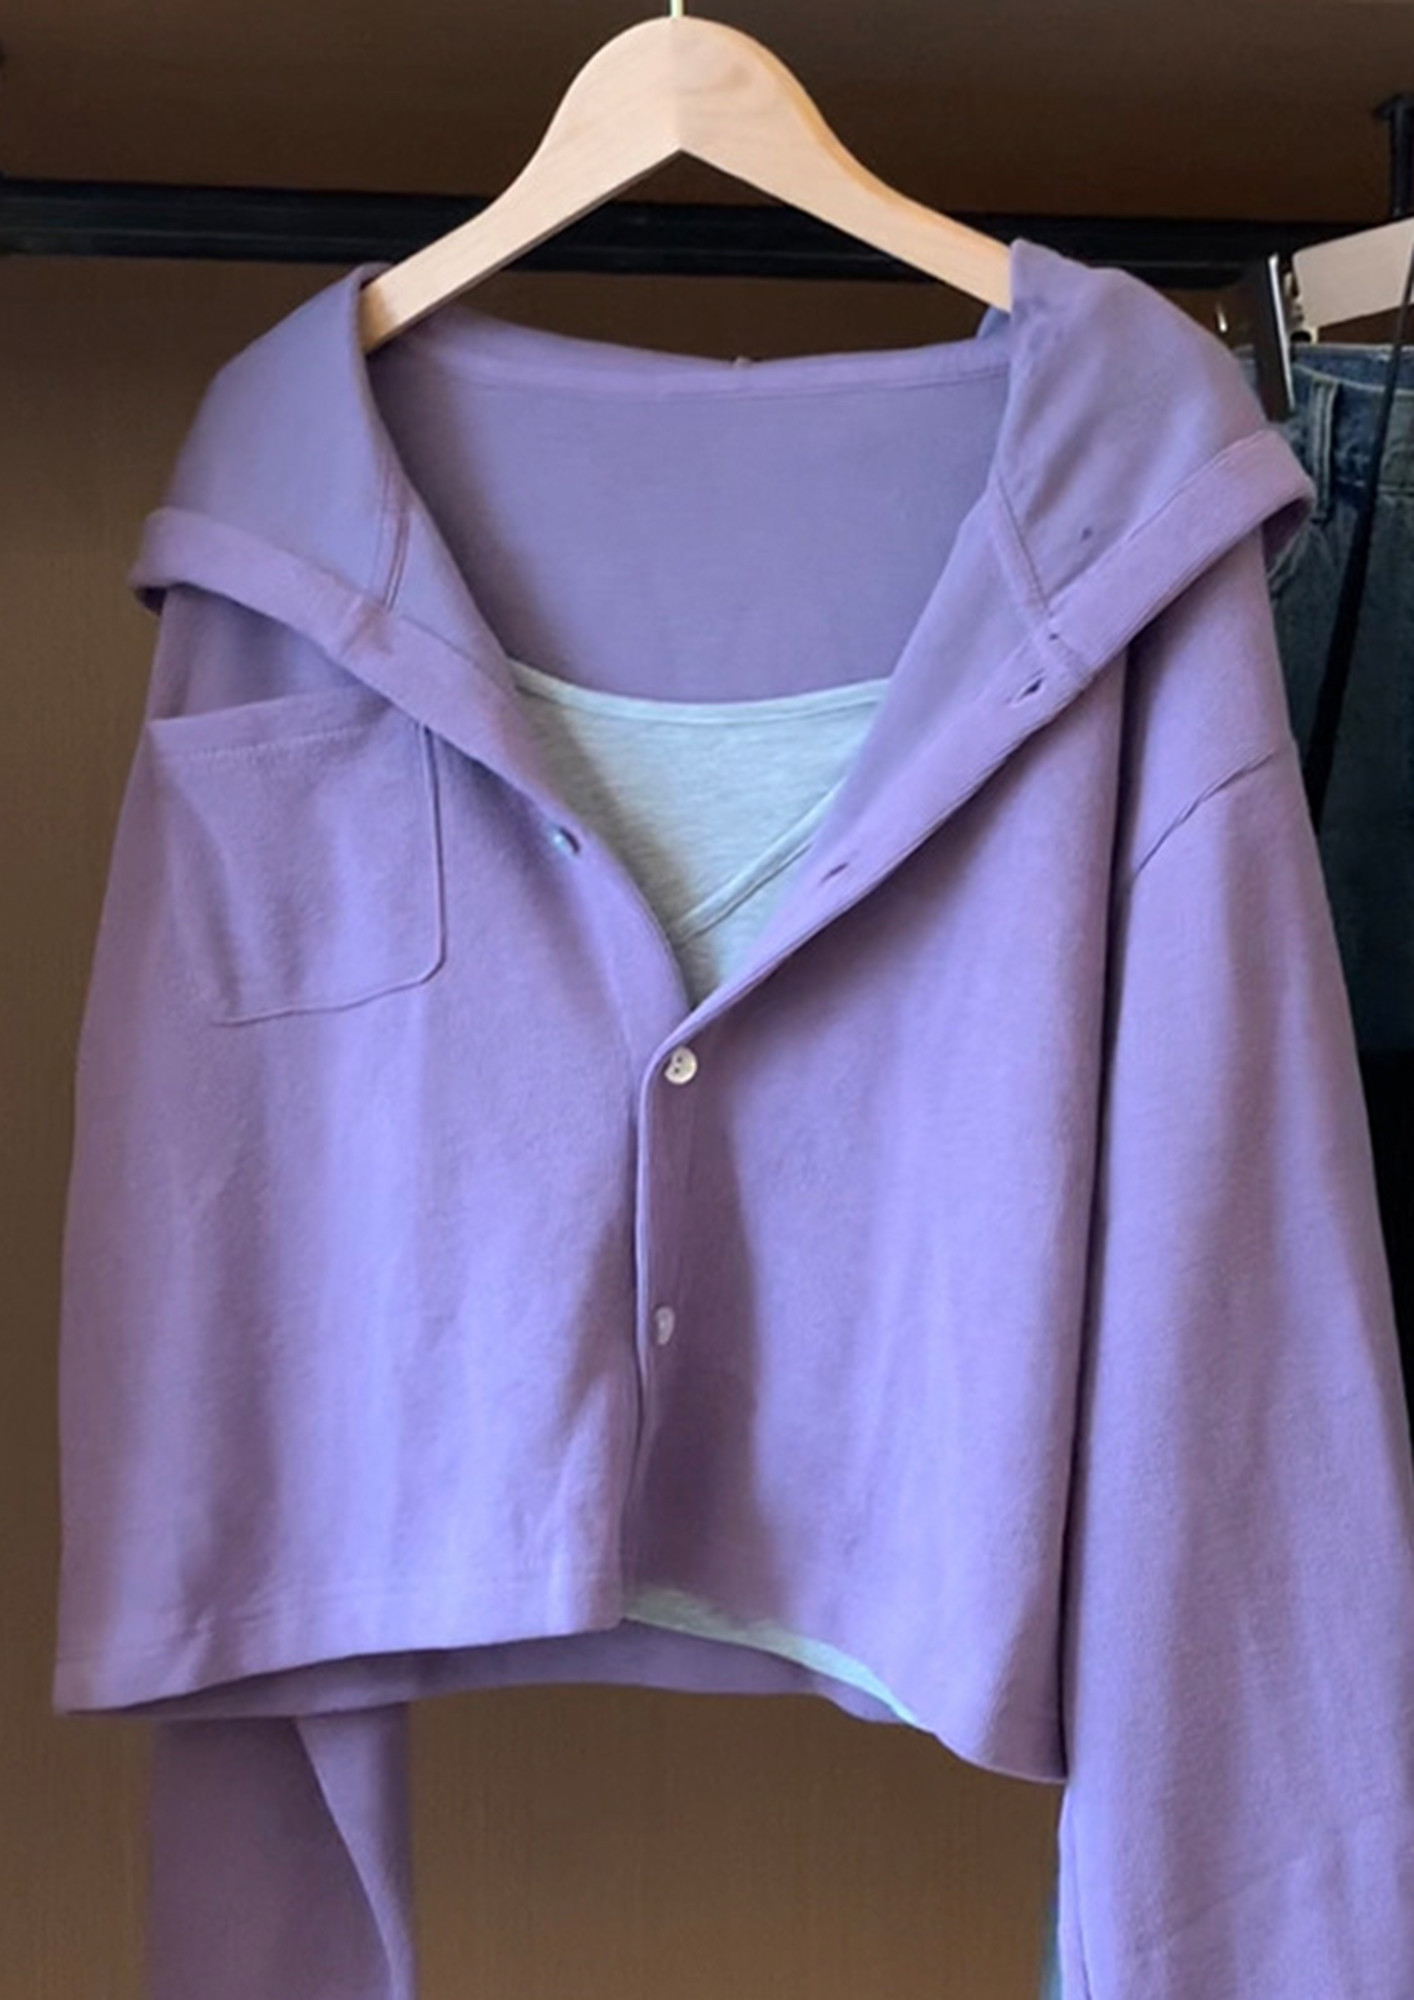 What can I wear under a buttoned light purple crop top? I was